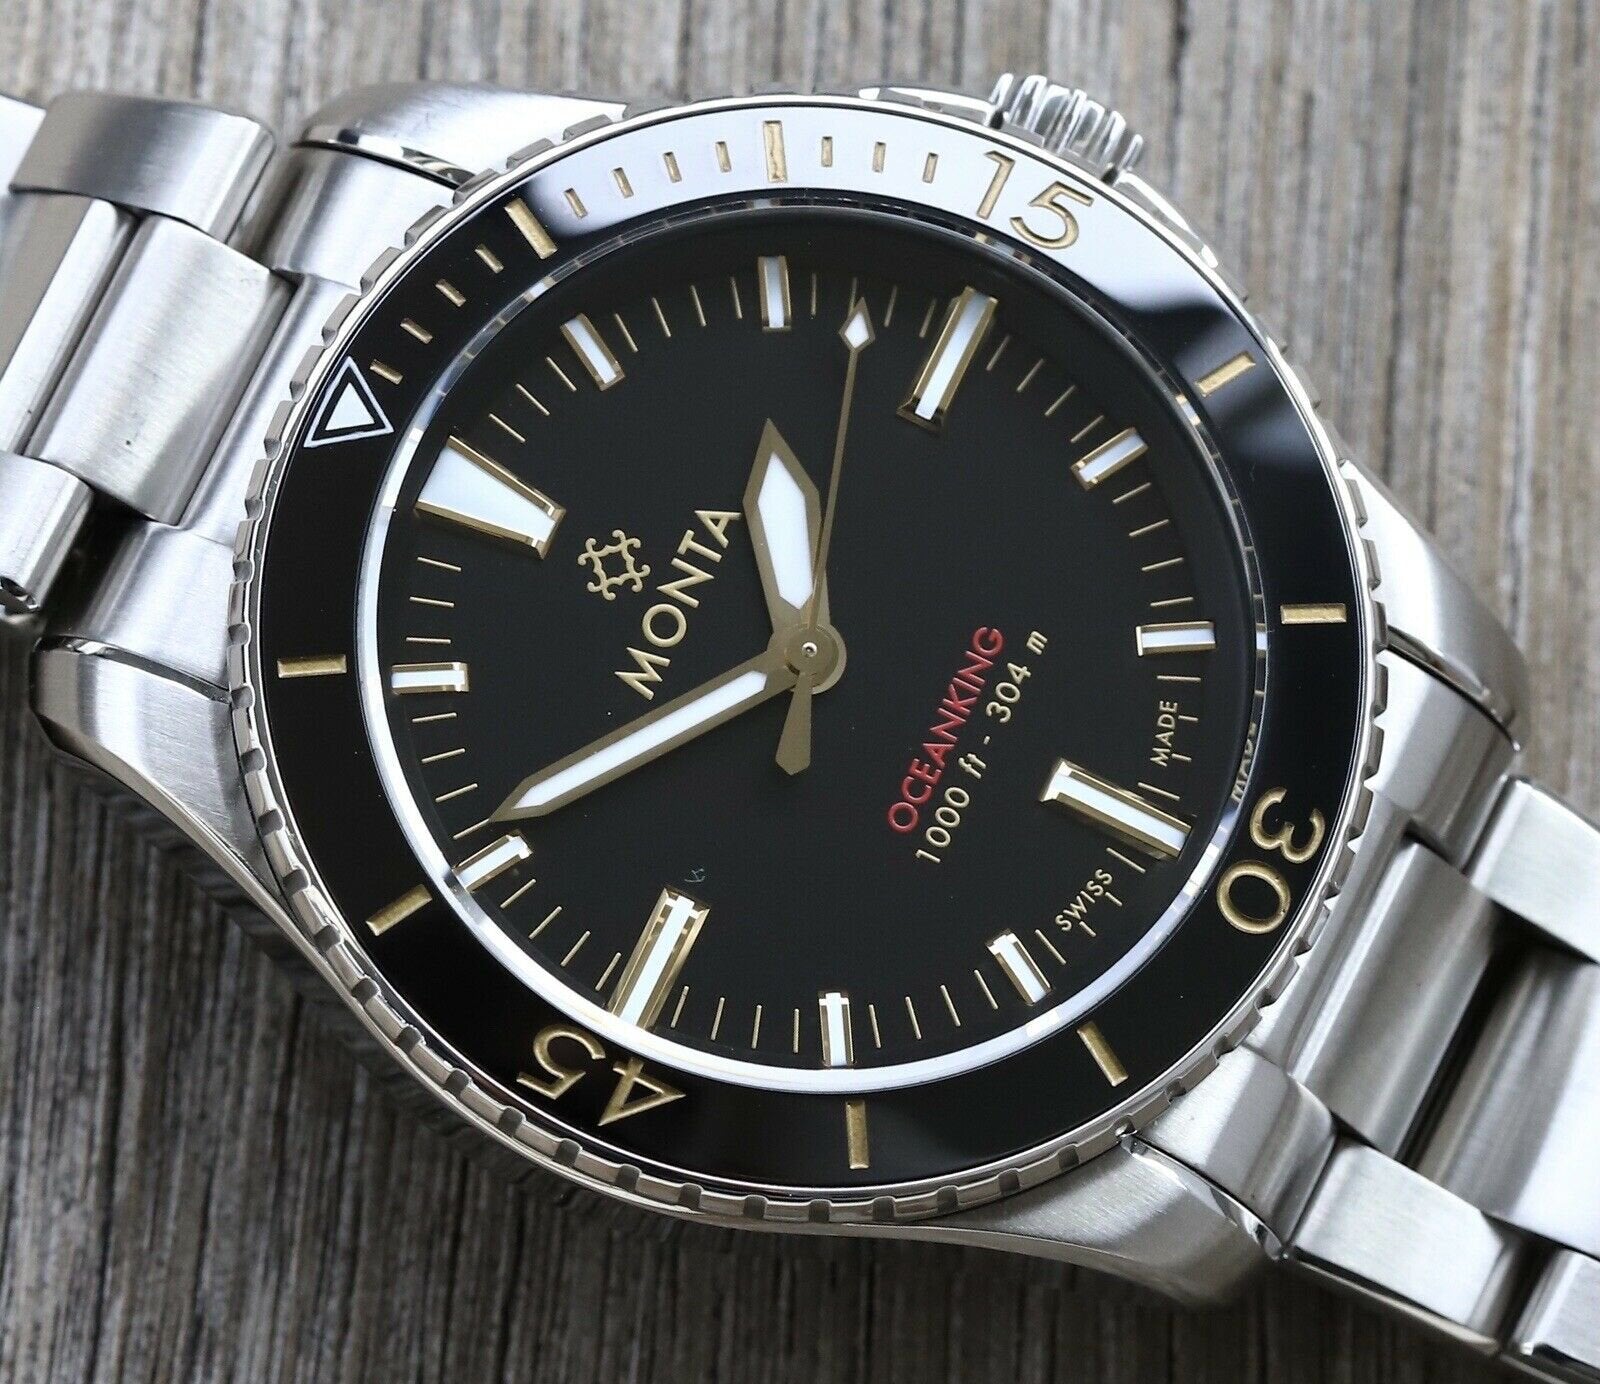 Monta_Oceanking_60-Minute_with_Date_and_Gilt_Dial_-_2020_Watch_Vault_02.jpg